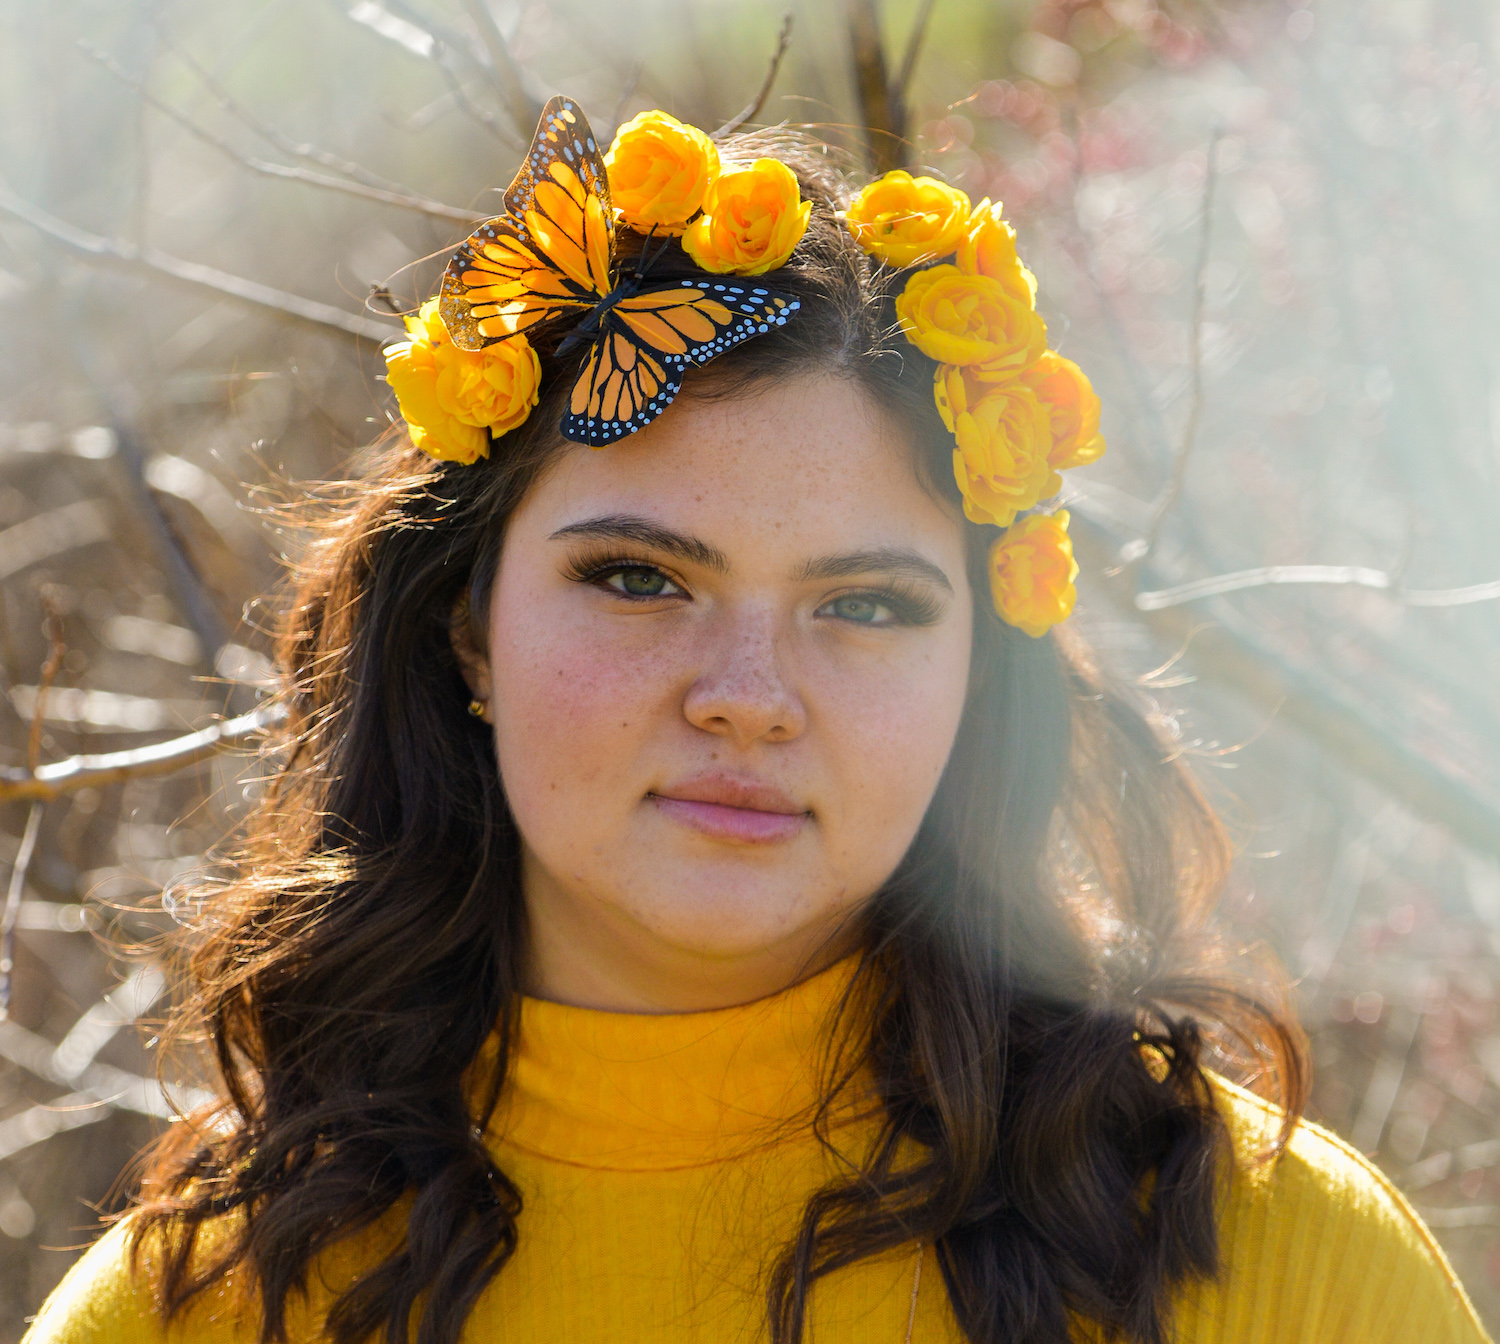 Young woman with dark hair wearing a yellow sweater. She has yellow flowers and a fabric monarch butterlfy in her hair.